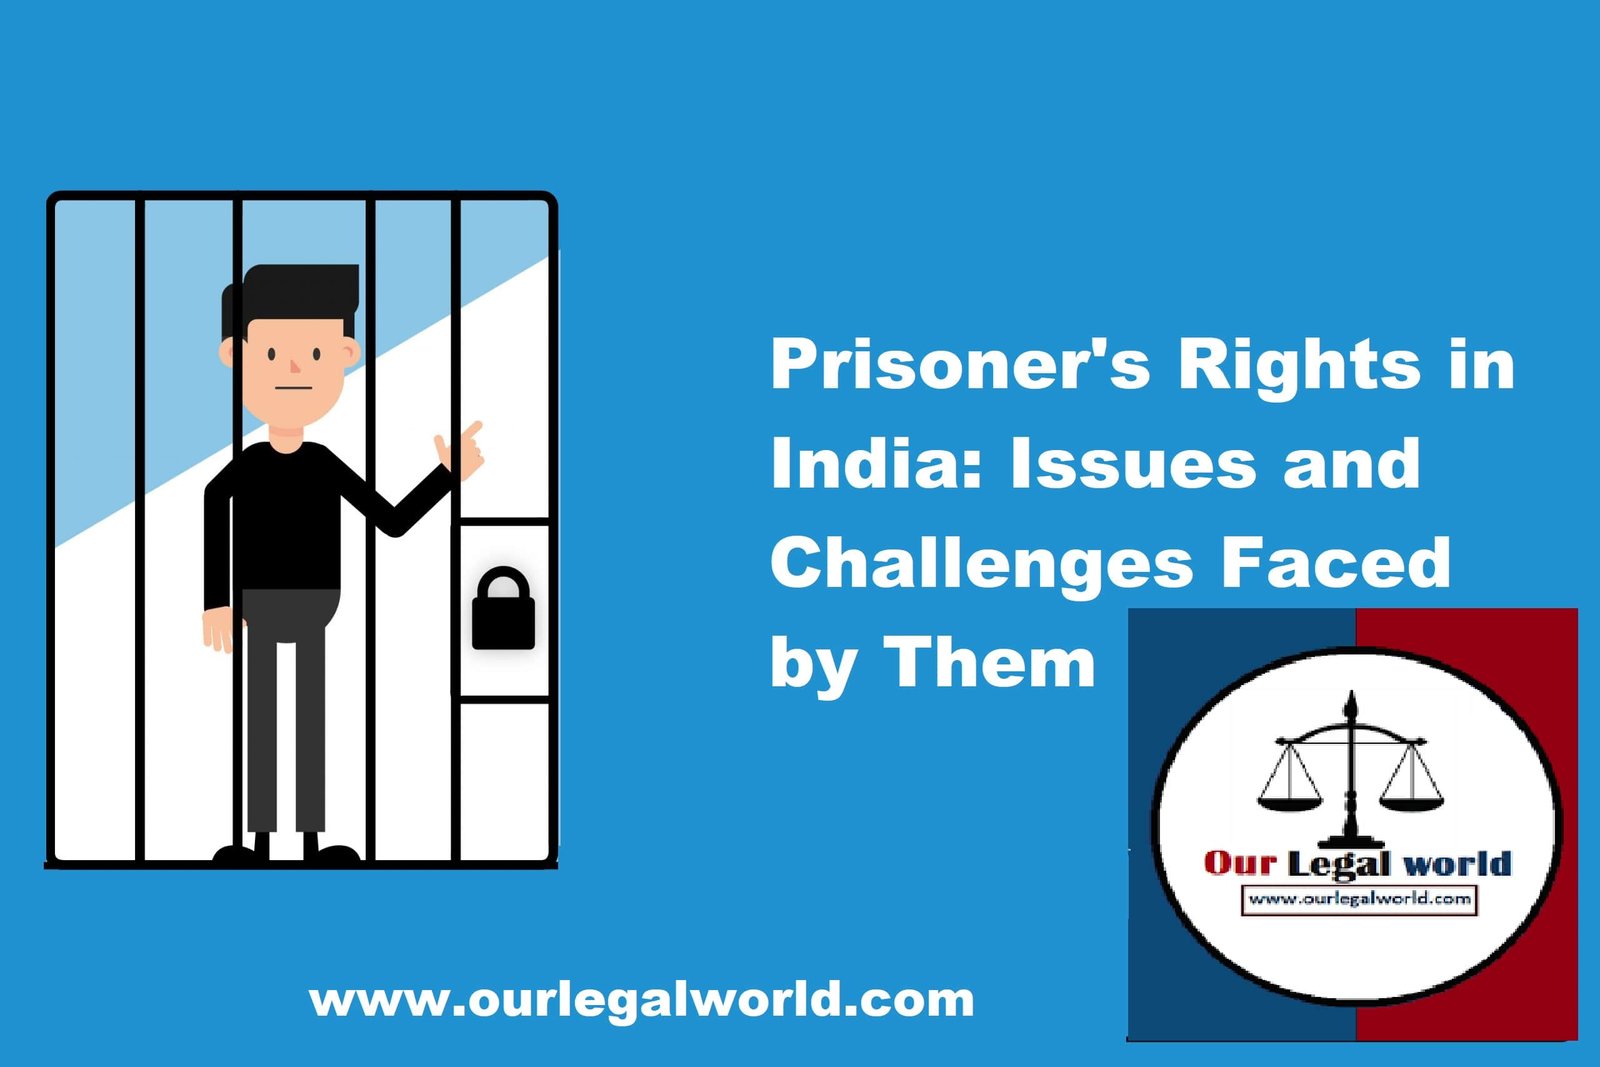 Prisoner's Rights in India: Issues and Challenges Faced by Them written by Meenal Gehlot